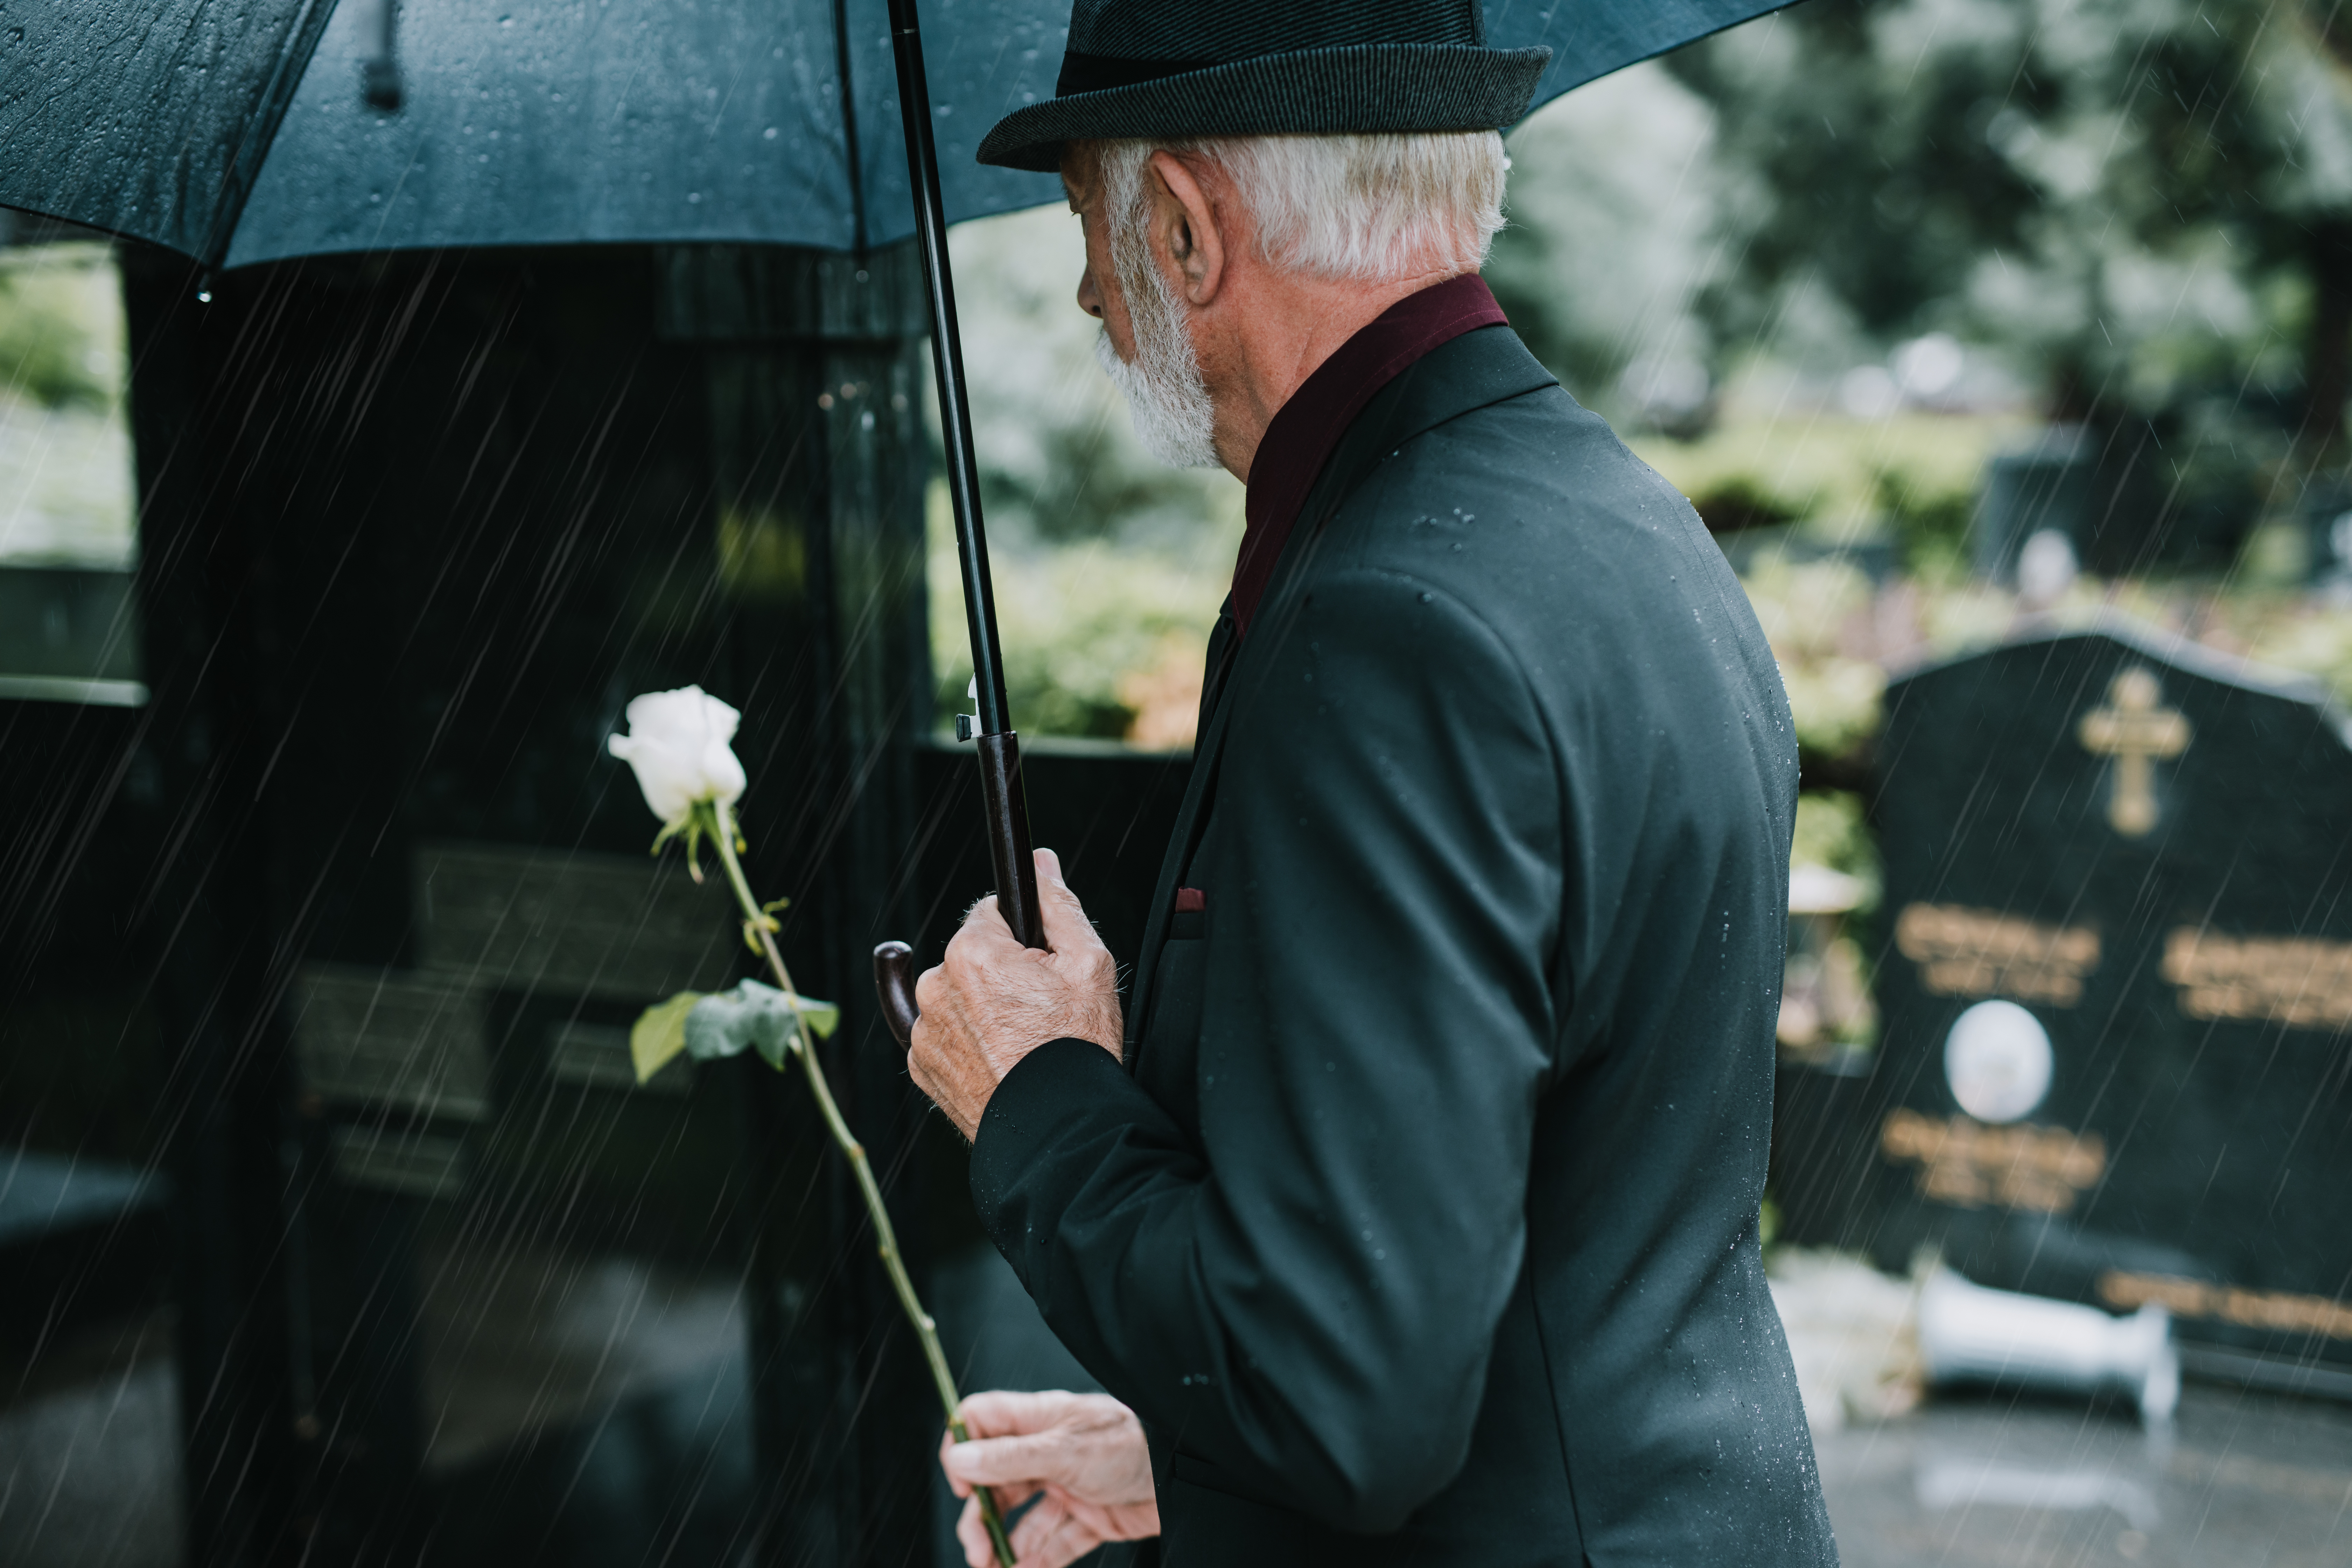 Man with white hair and beard, wearing black suit and hat, holding black umbrella and white flower, standing near gravestones.